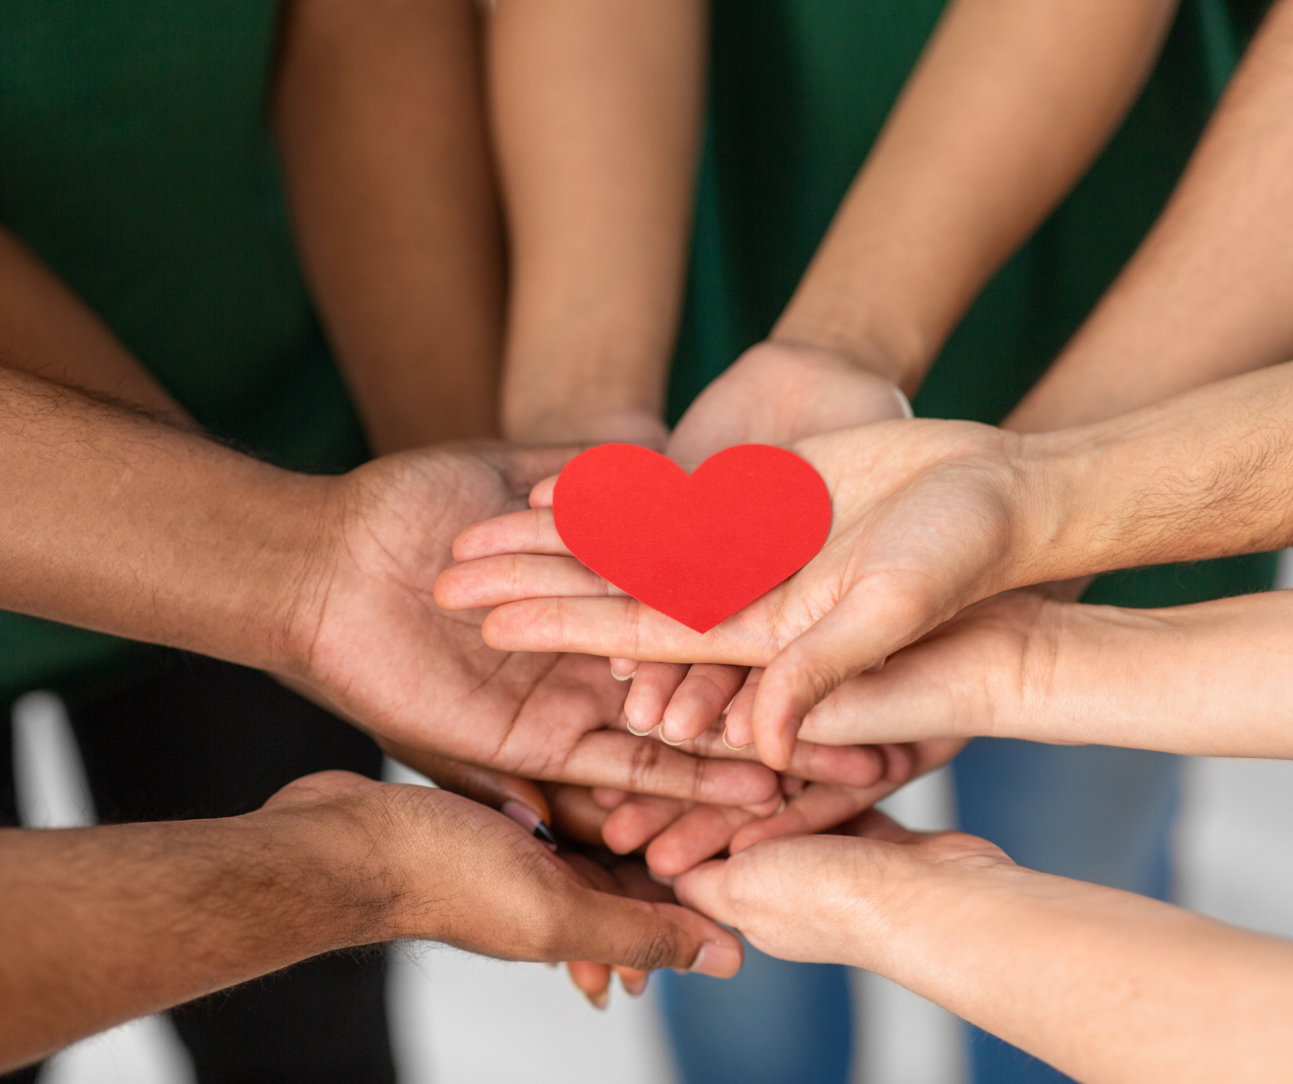 Group of people place their hands on top of each others with a red heart on top